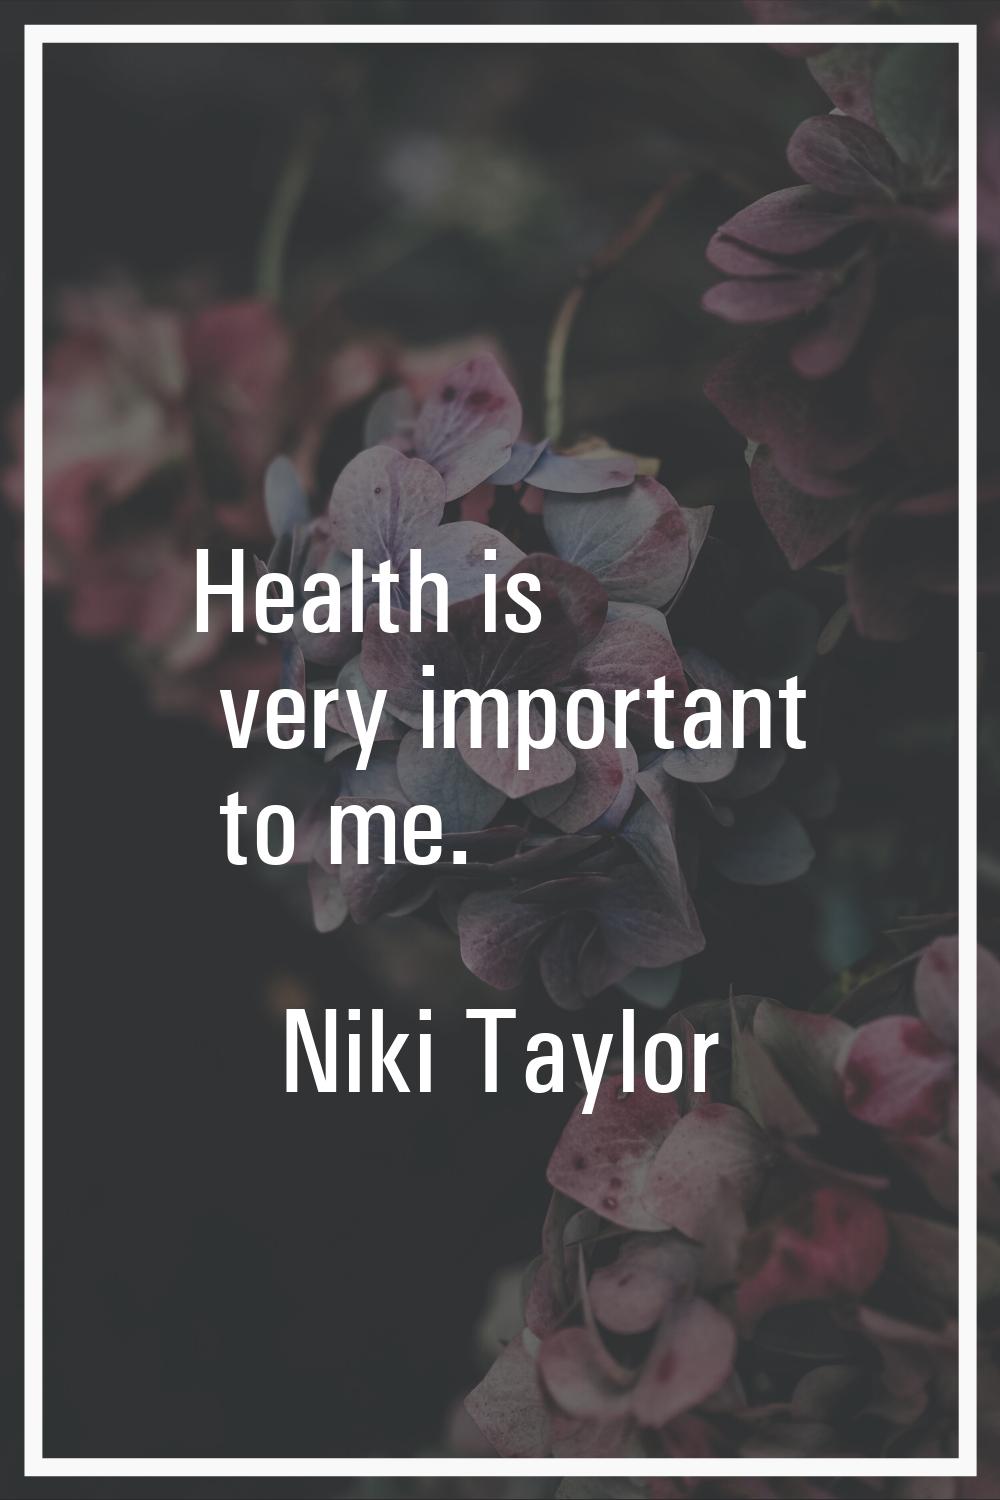 Health is very important to me.